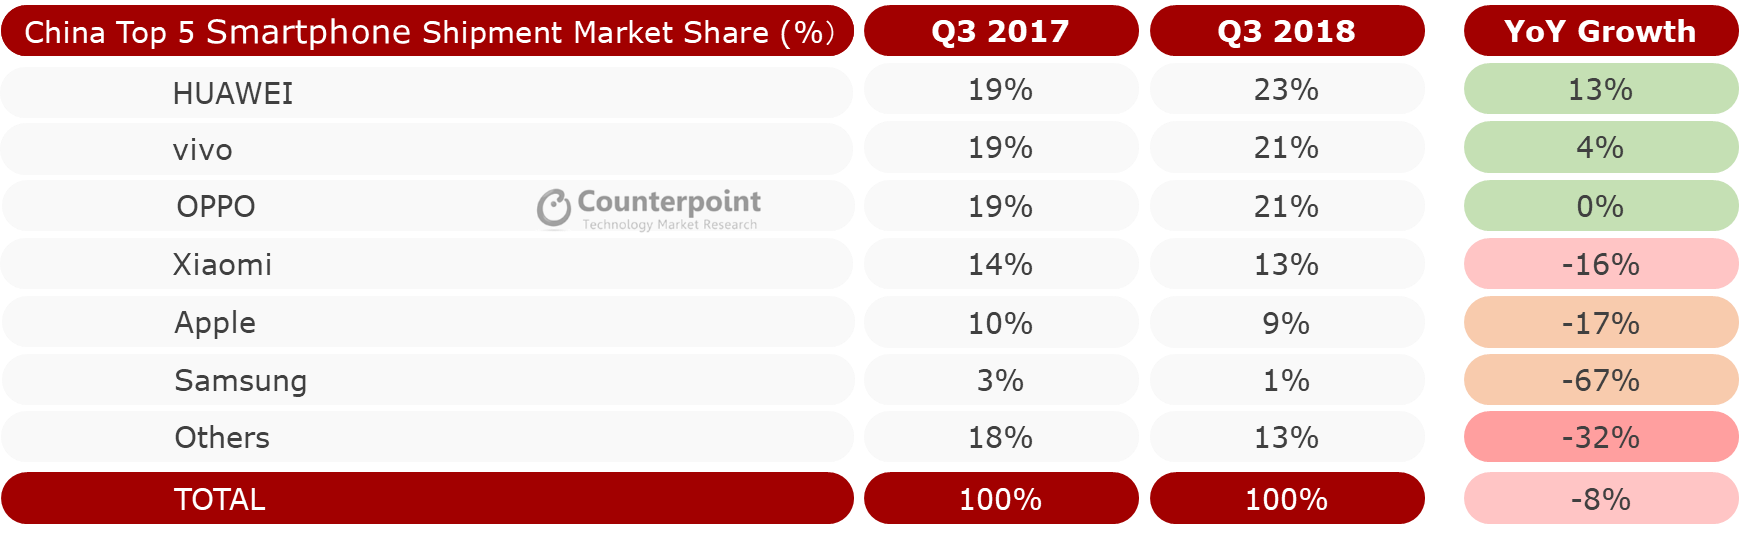 Exhibit-1-Chinese-Smartphone-Market-Share-Q3-2018.png